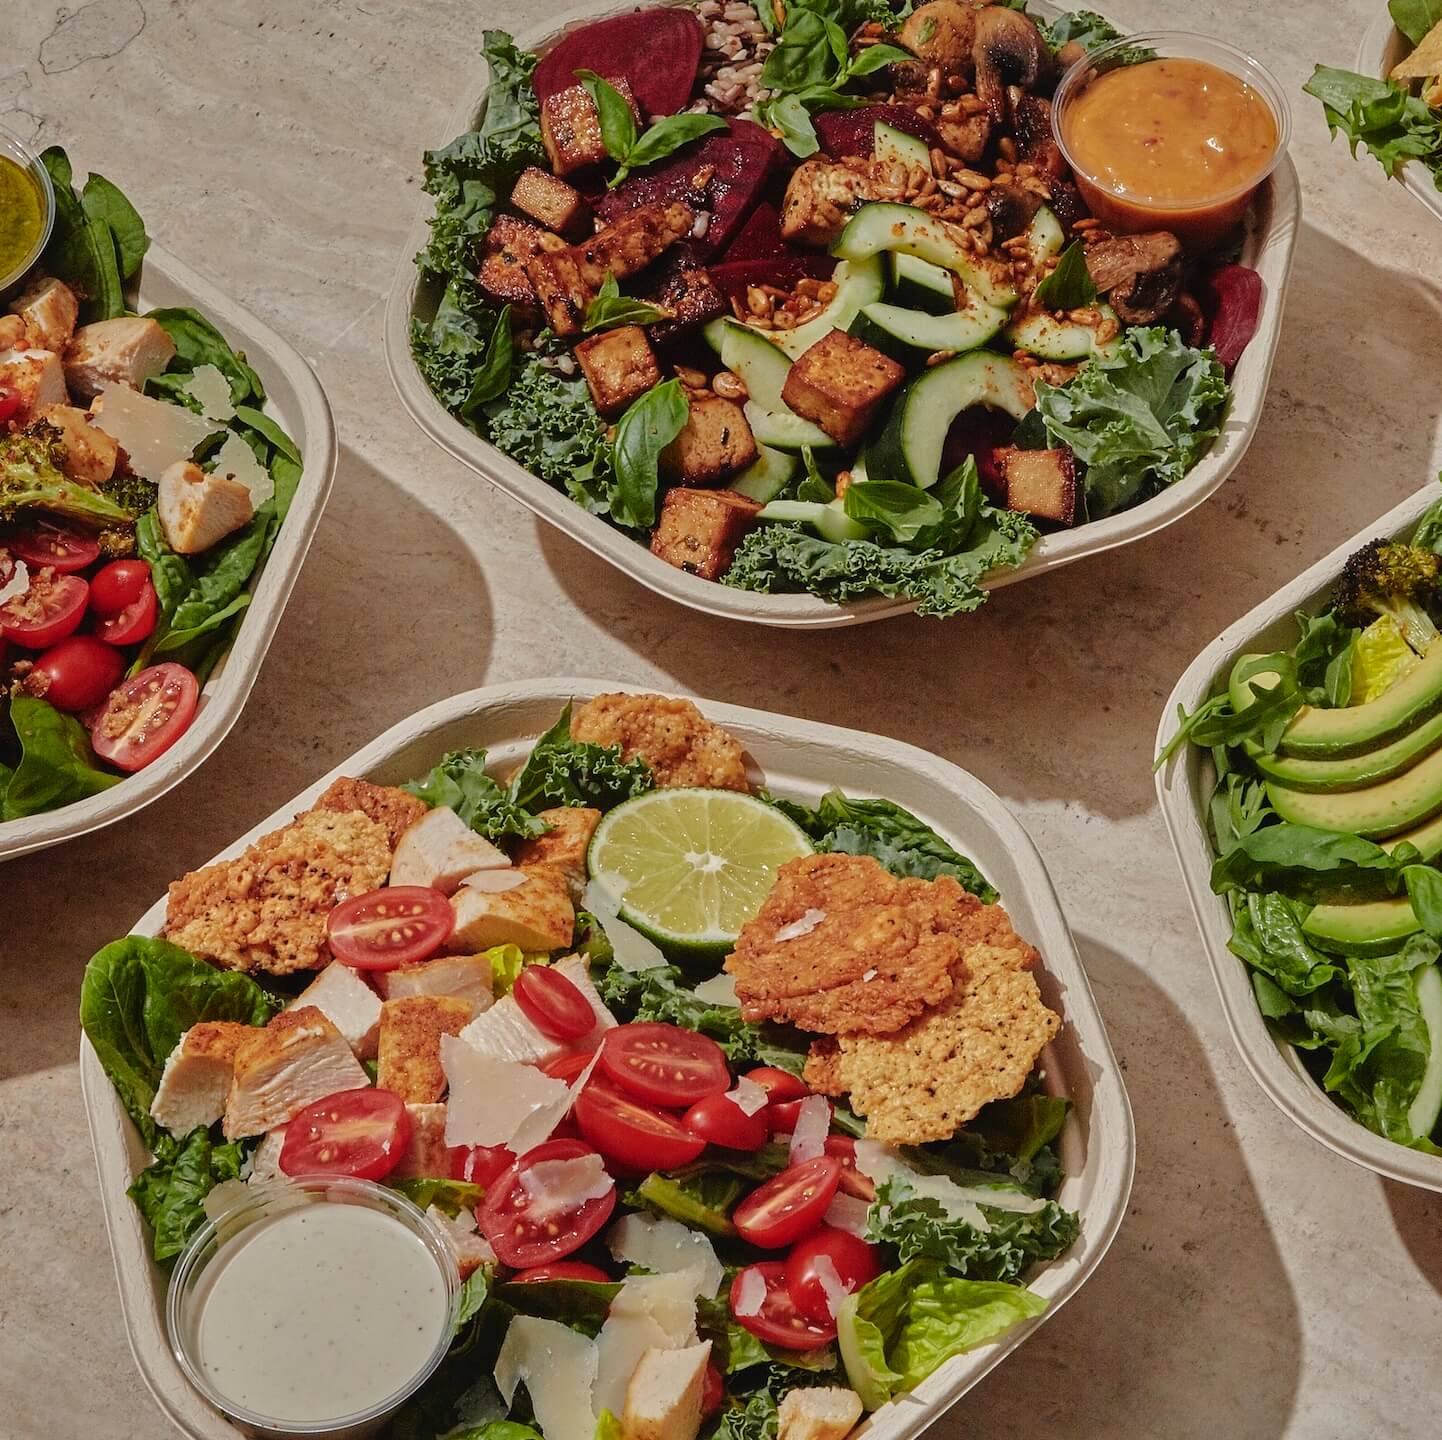 Sweetgreen and Chipotle pledge to remove PFAS from their bowls by 2020 (March 2020)